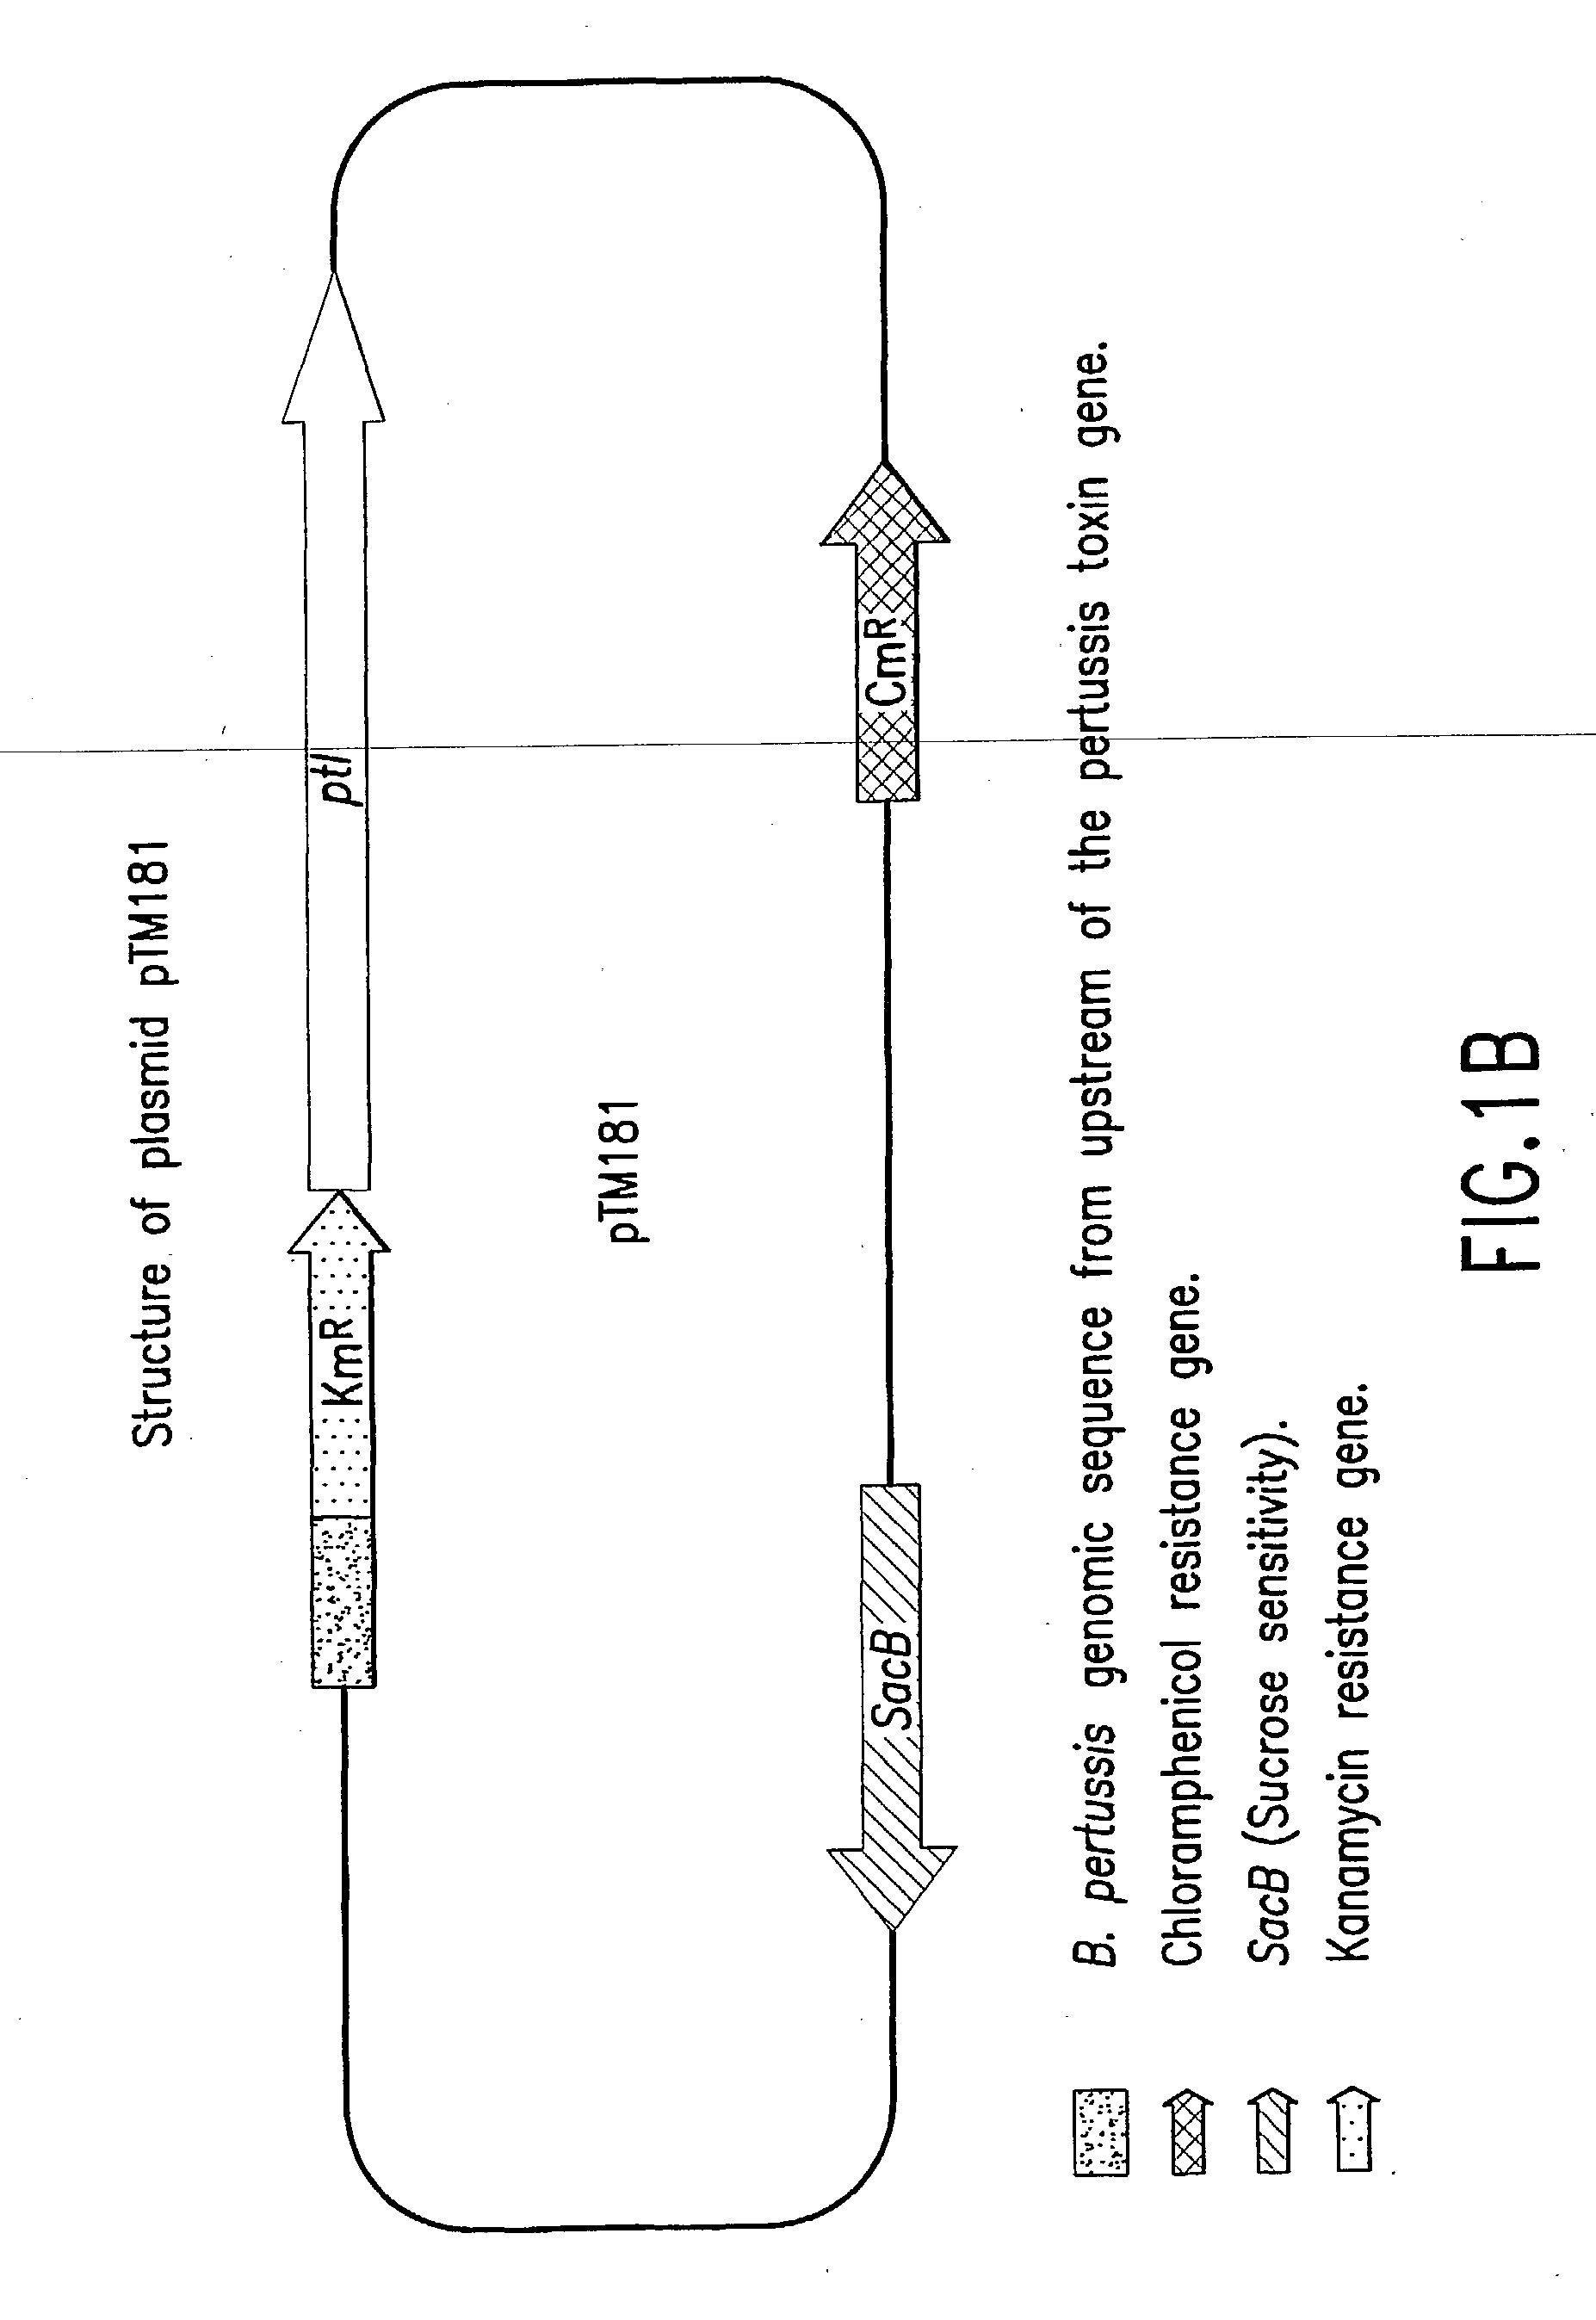 High yield pertussis vaccine production strain and method for making same